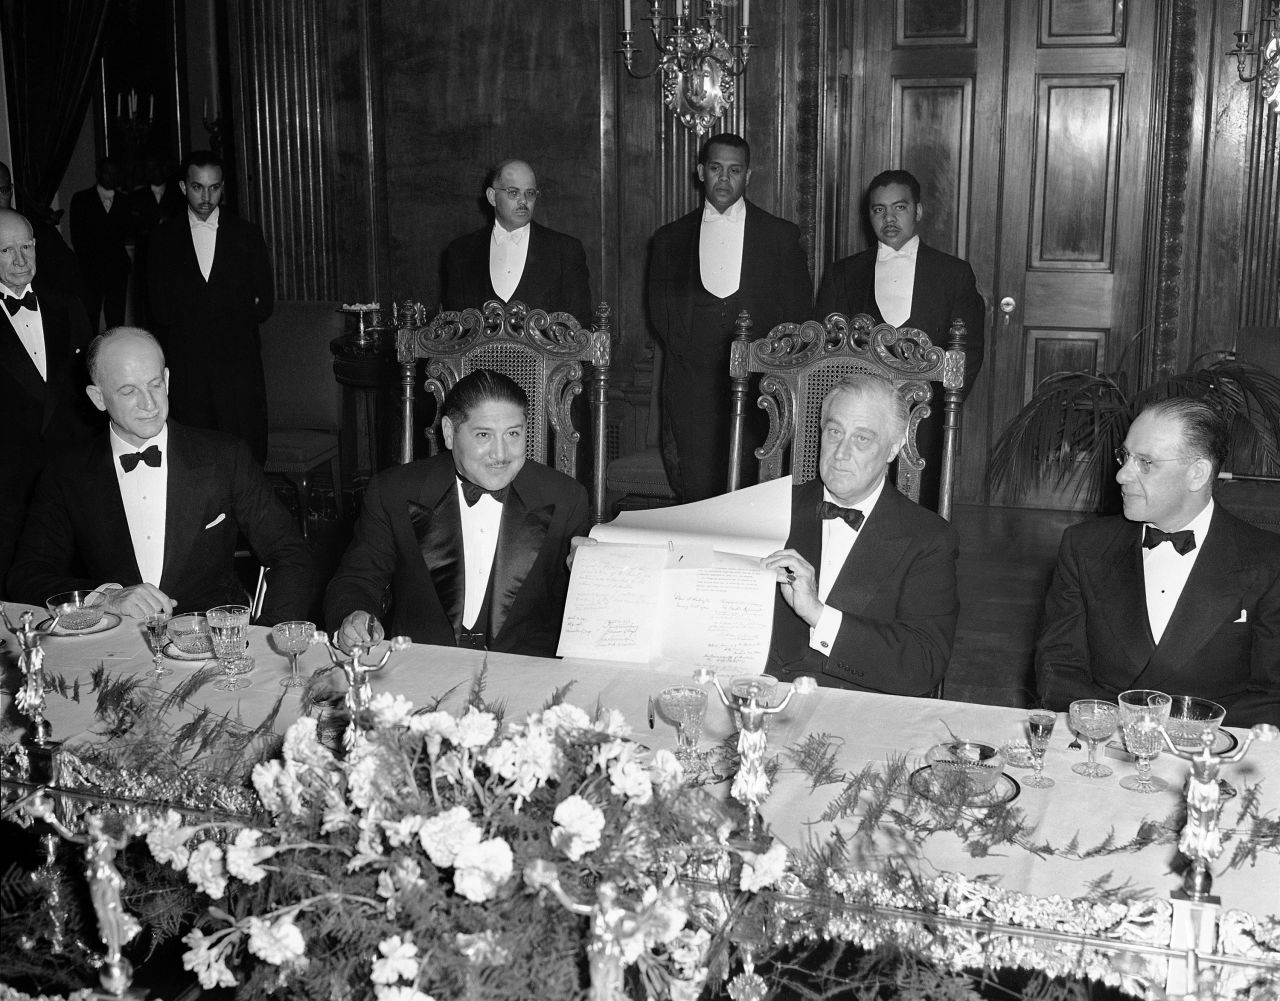 US President Franklin D. Roosevelt holds up the United Nations Declaration next to Bolivian President Enrique Penaranda after Penaranda signed it during a state dinner at the White House in 1943. "Roosevelt is really the first to start using the dinners a bit more strategically," Matthew Costello, a historian with the White House Historical Association, said in 2020.